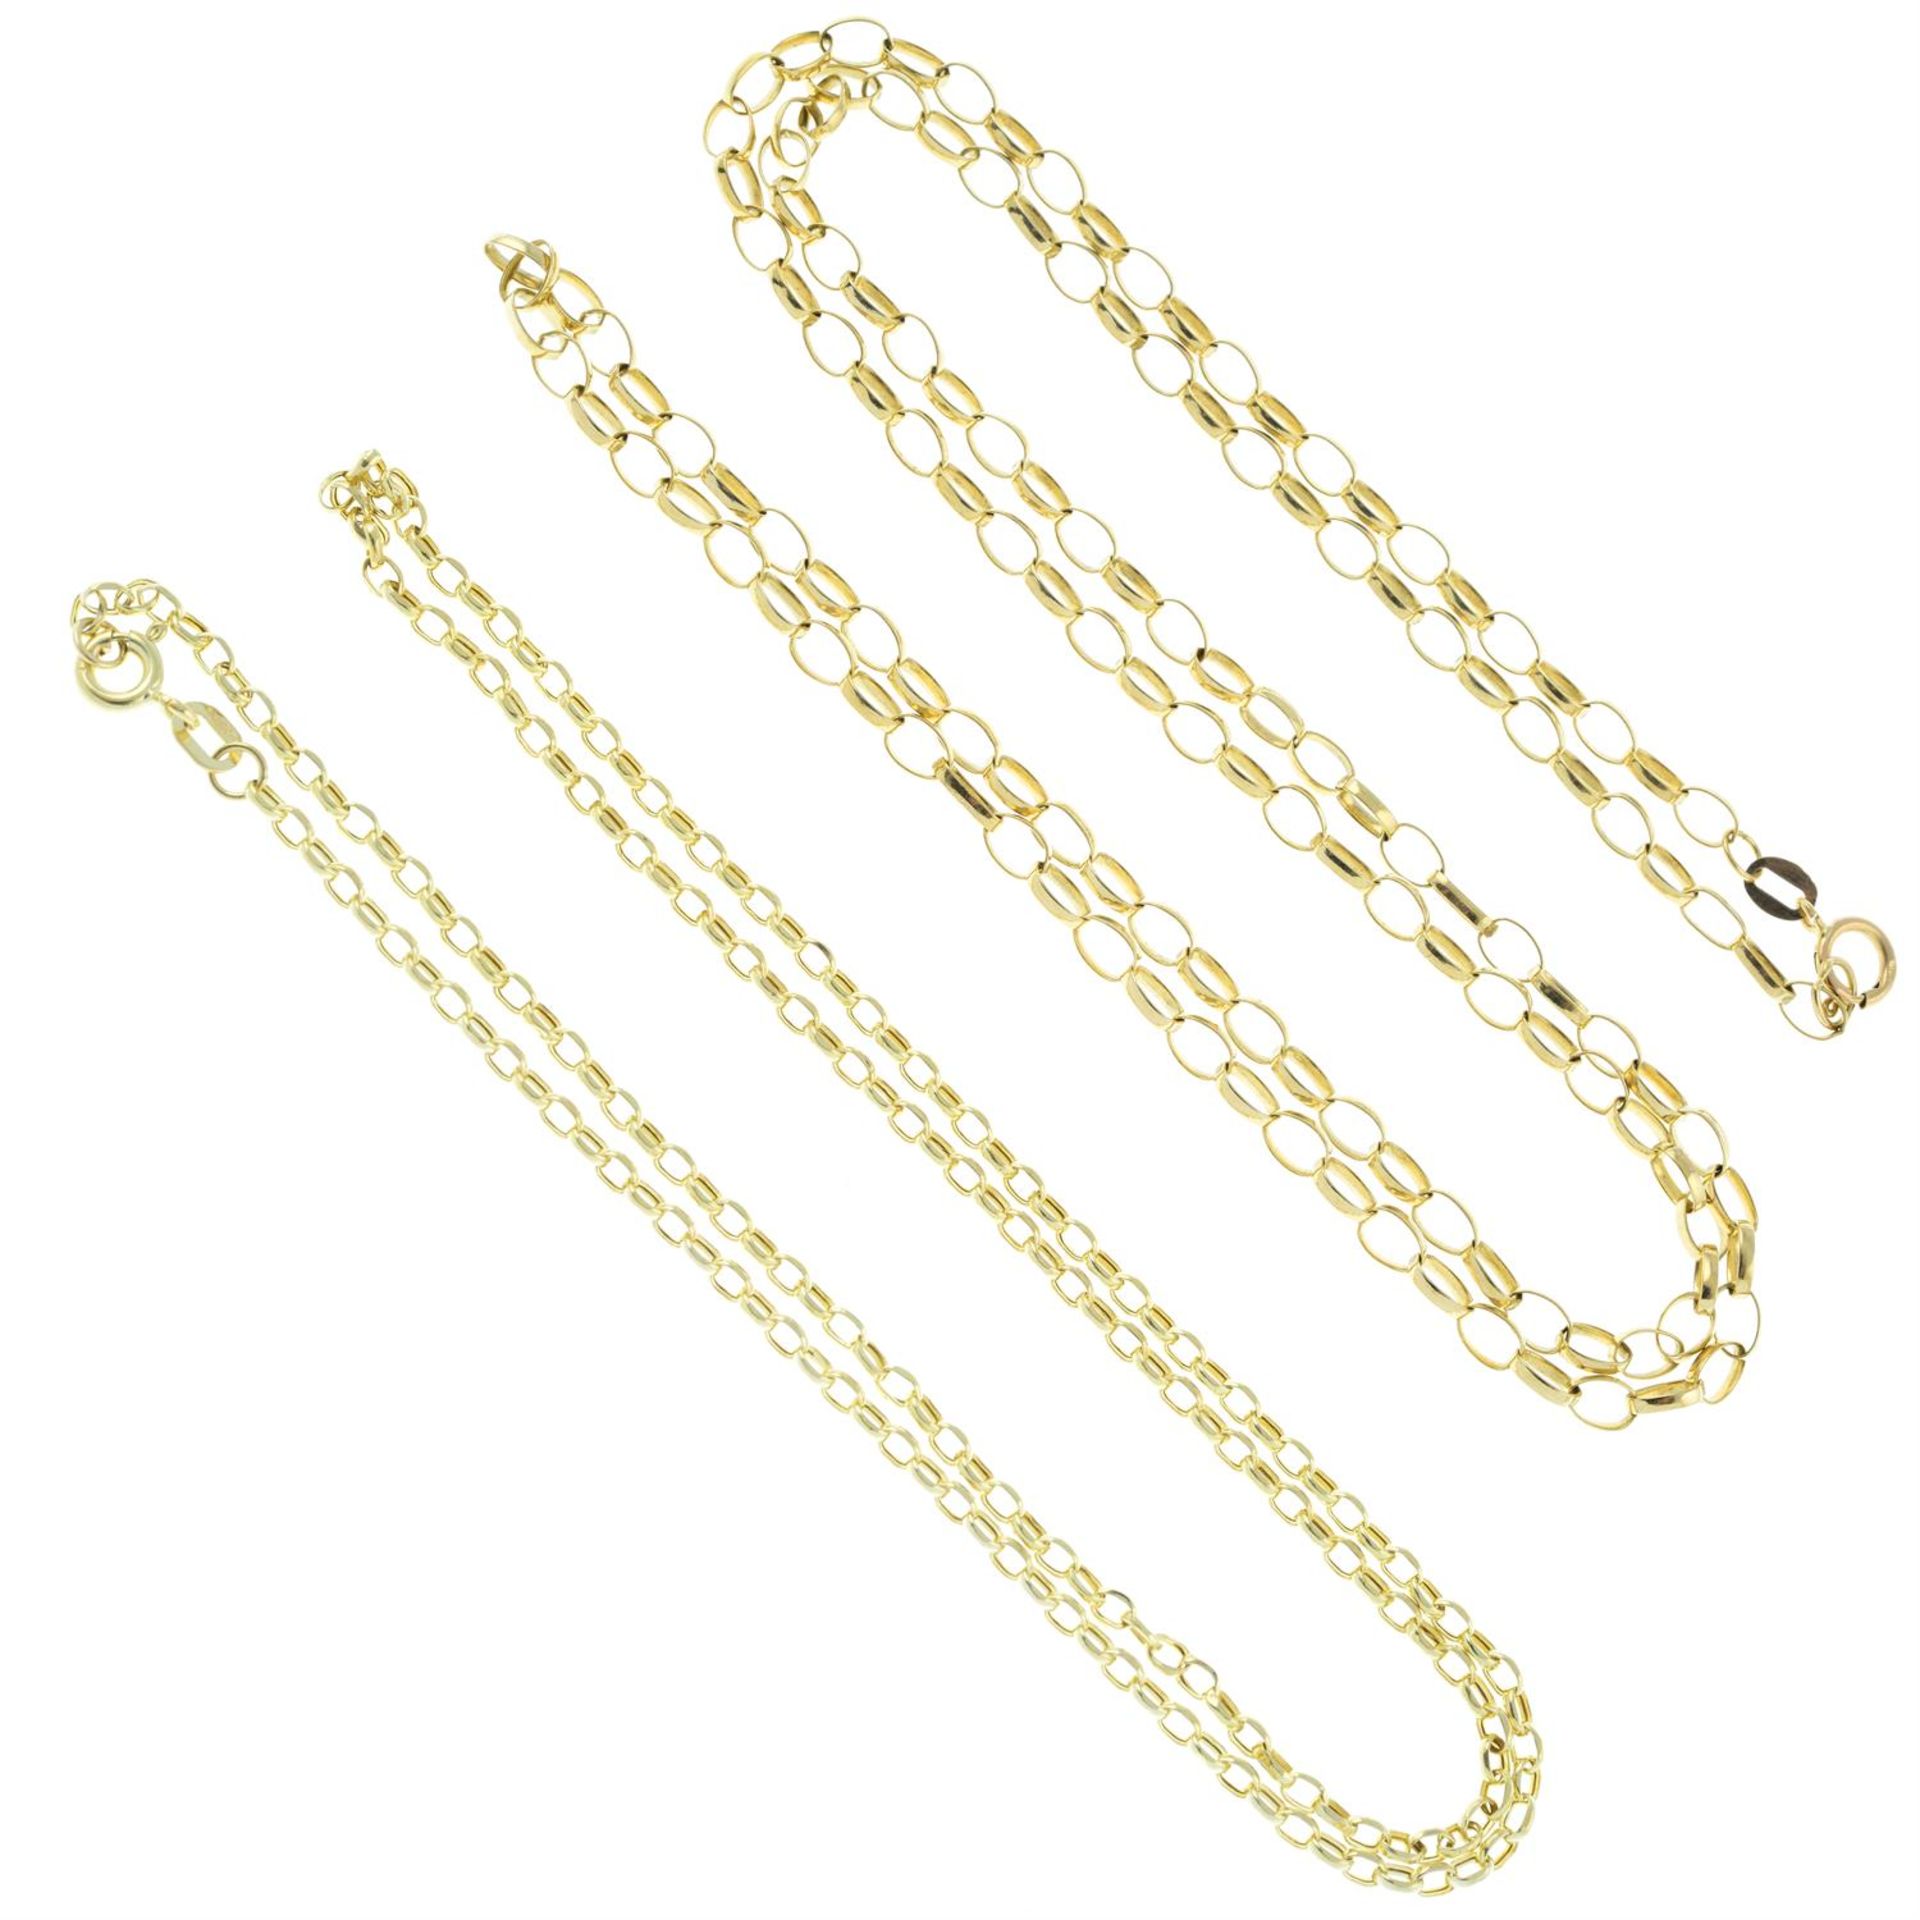 Two 9ct gold trace-link chains.